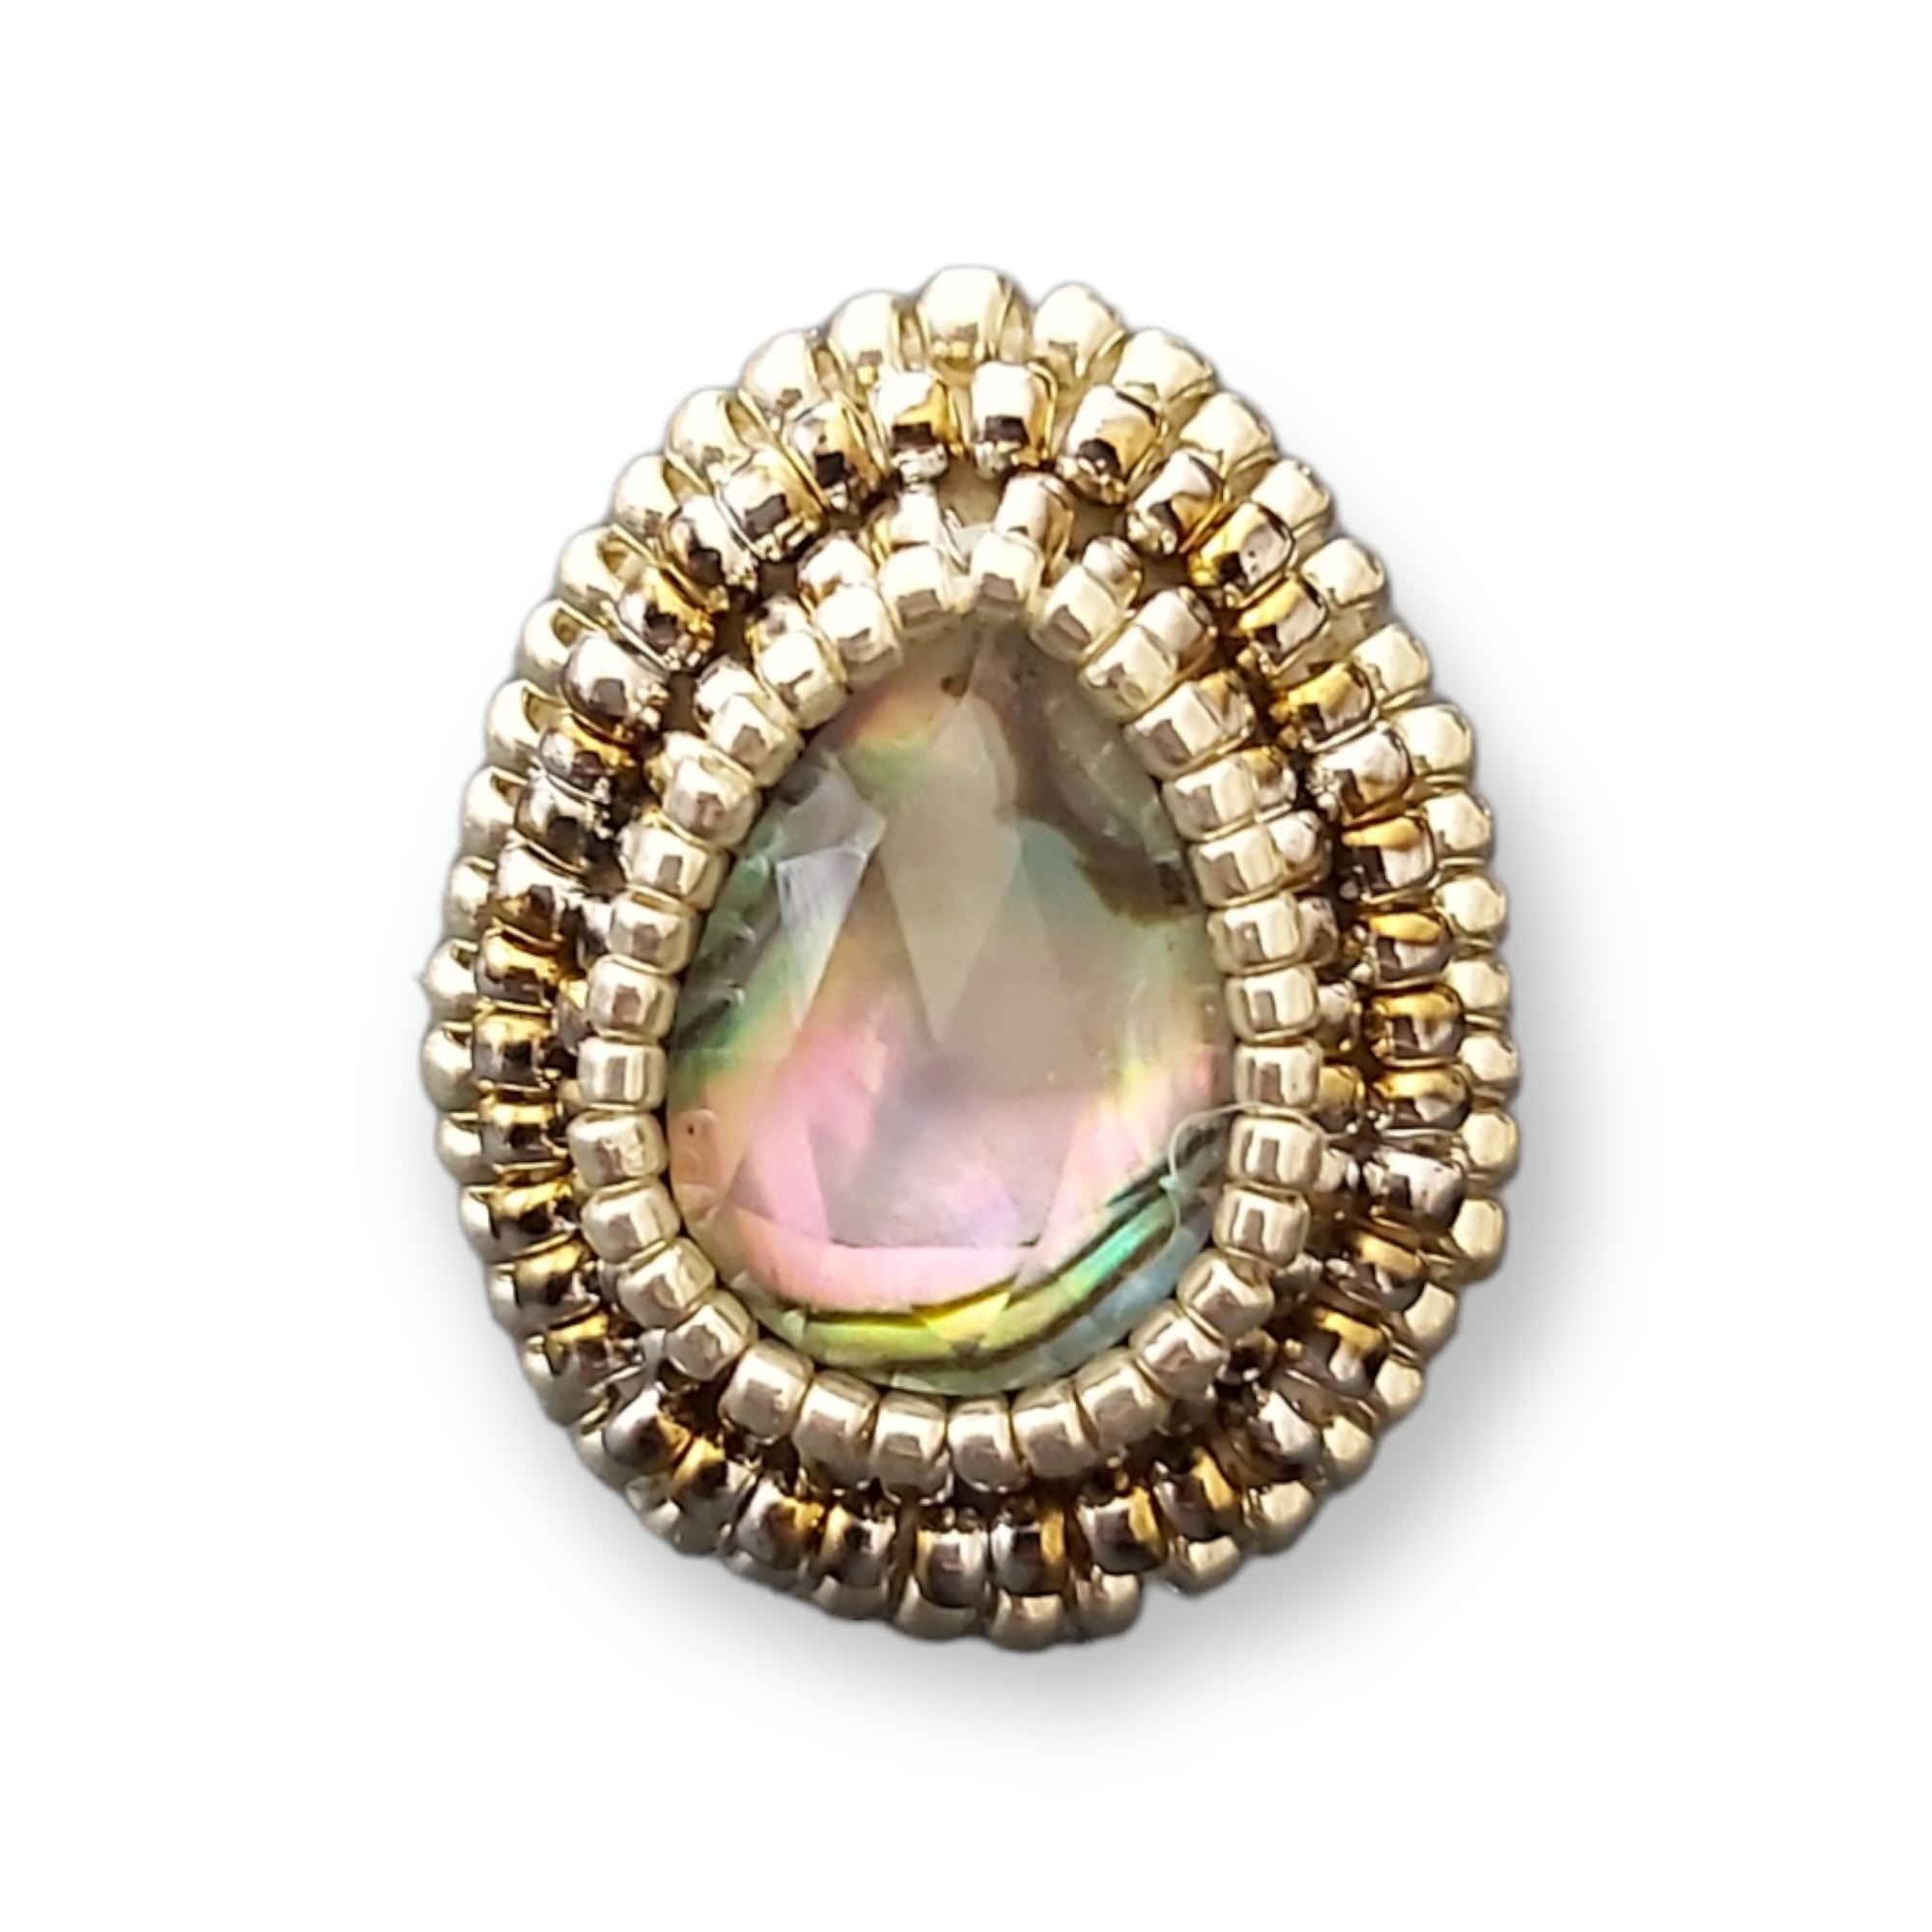 Cynthia Poh - Natural Shell Pearl Crystal Doublet Ring (cpoh018)